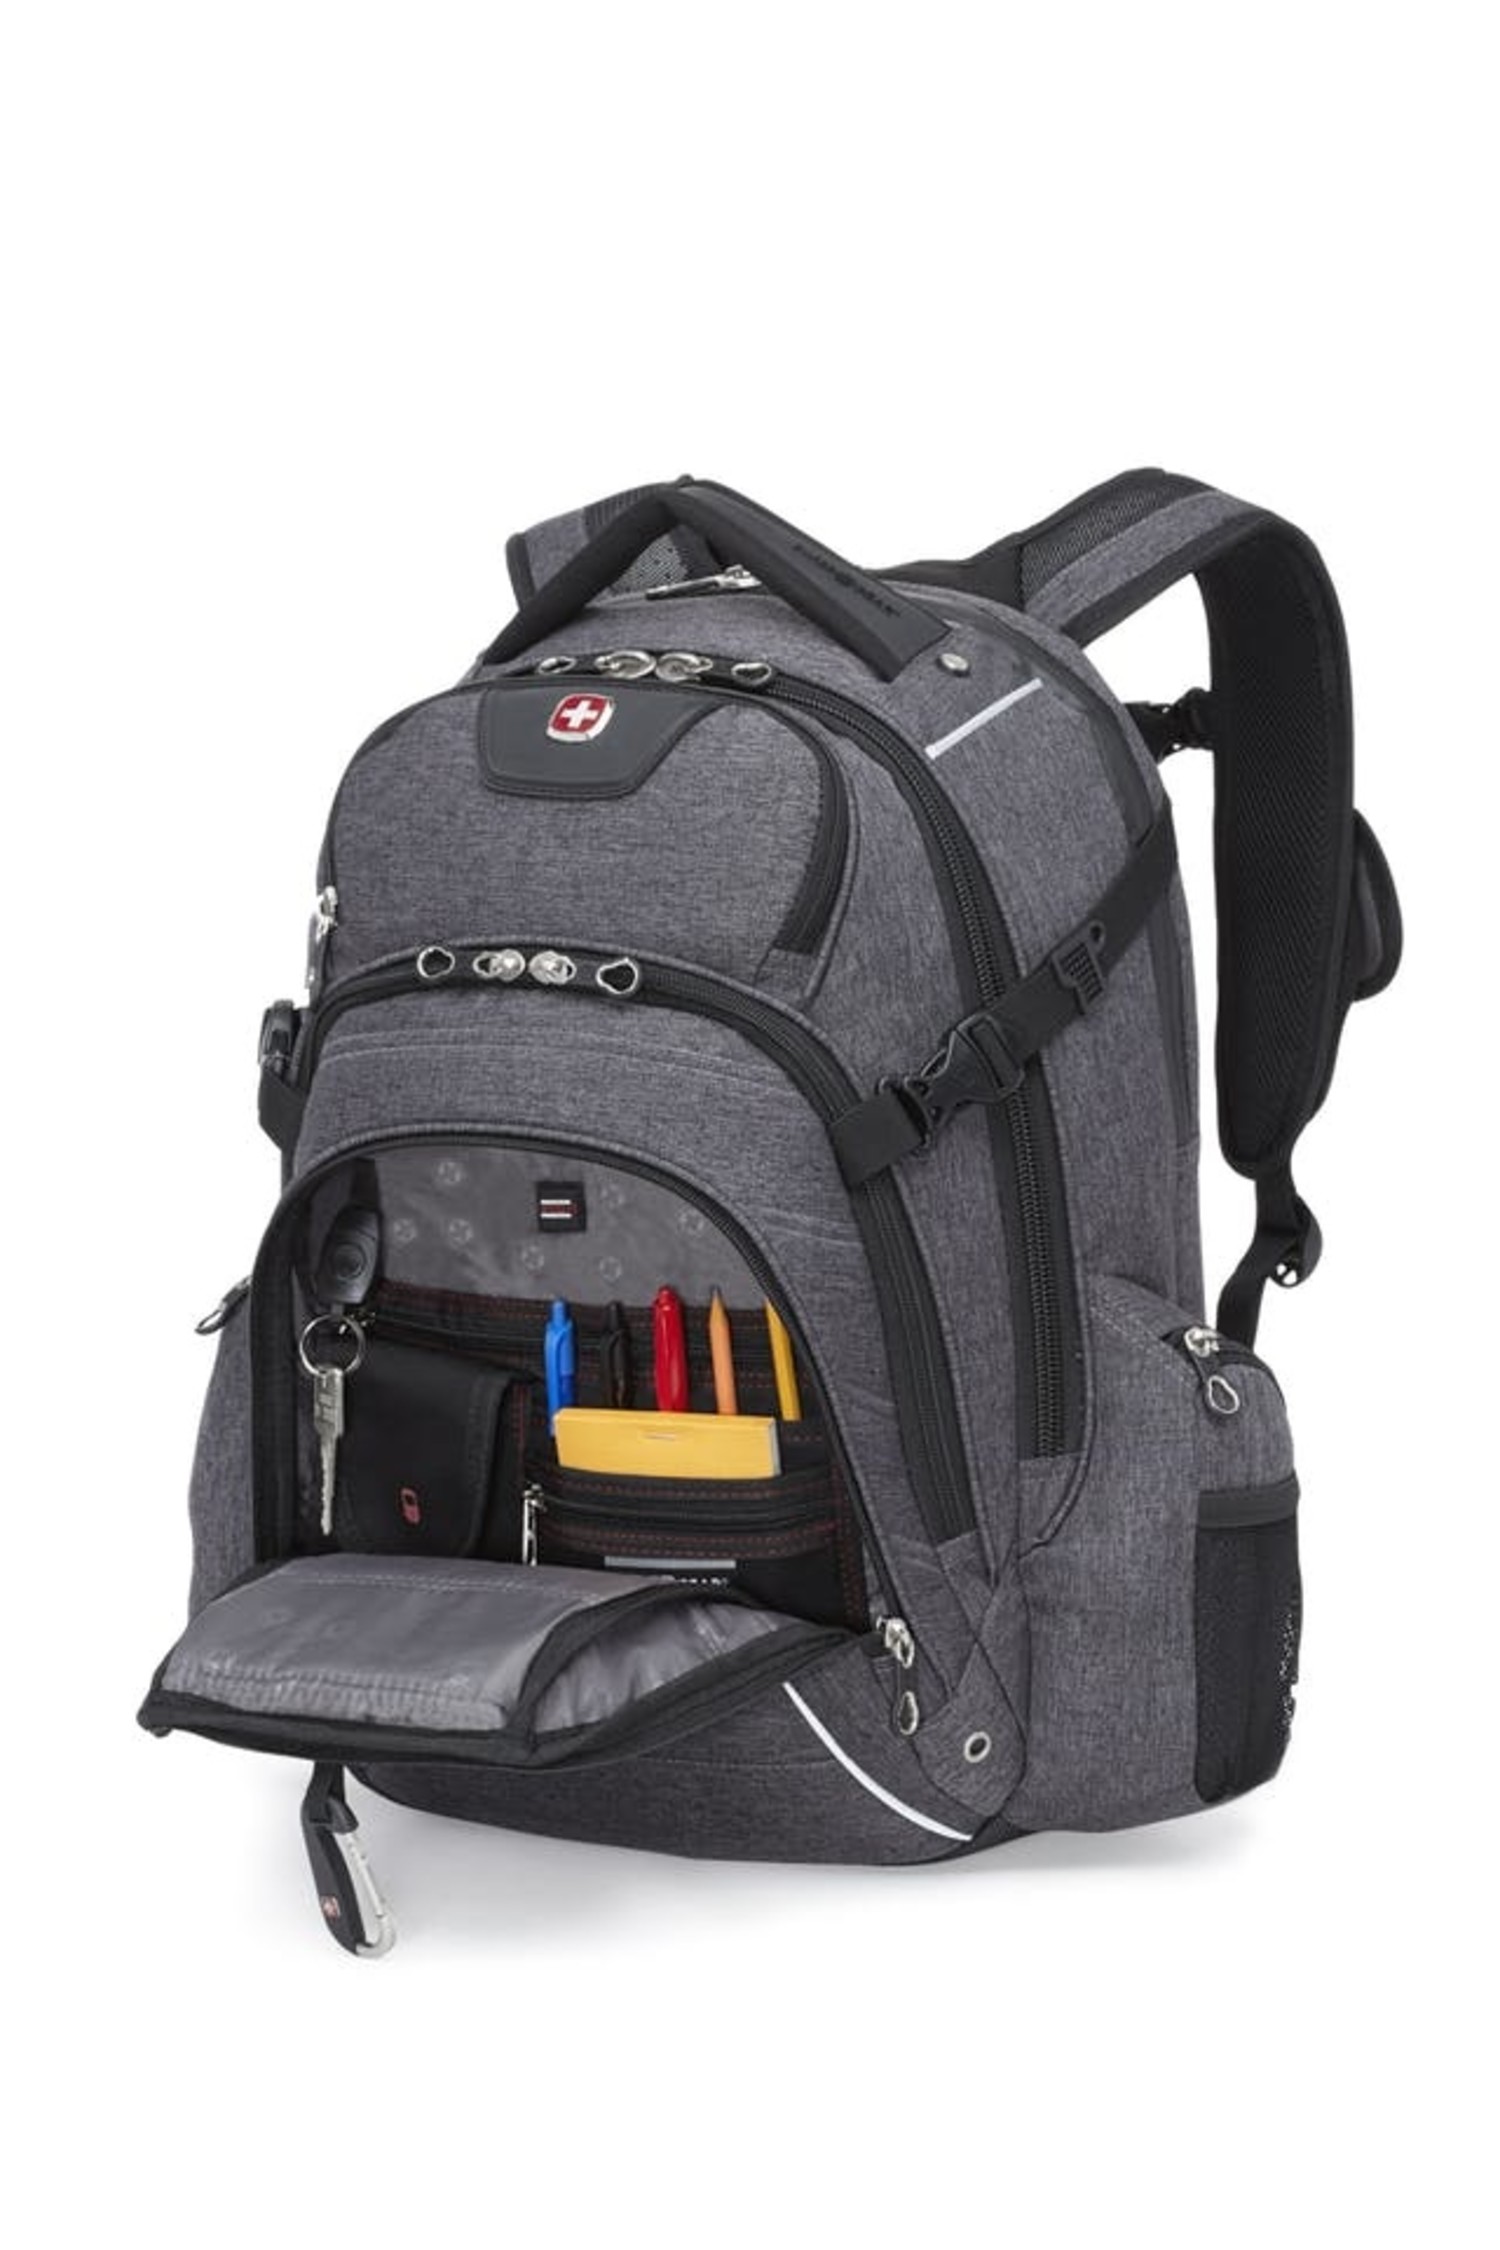 Swiss Gear 9855 17 Computer Backpack Grey - Just Bags Luggage Center